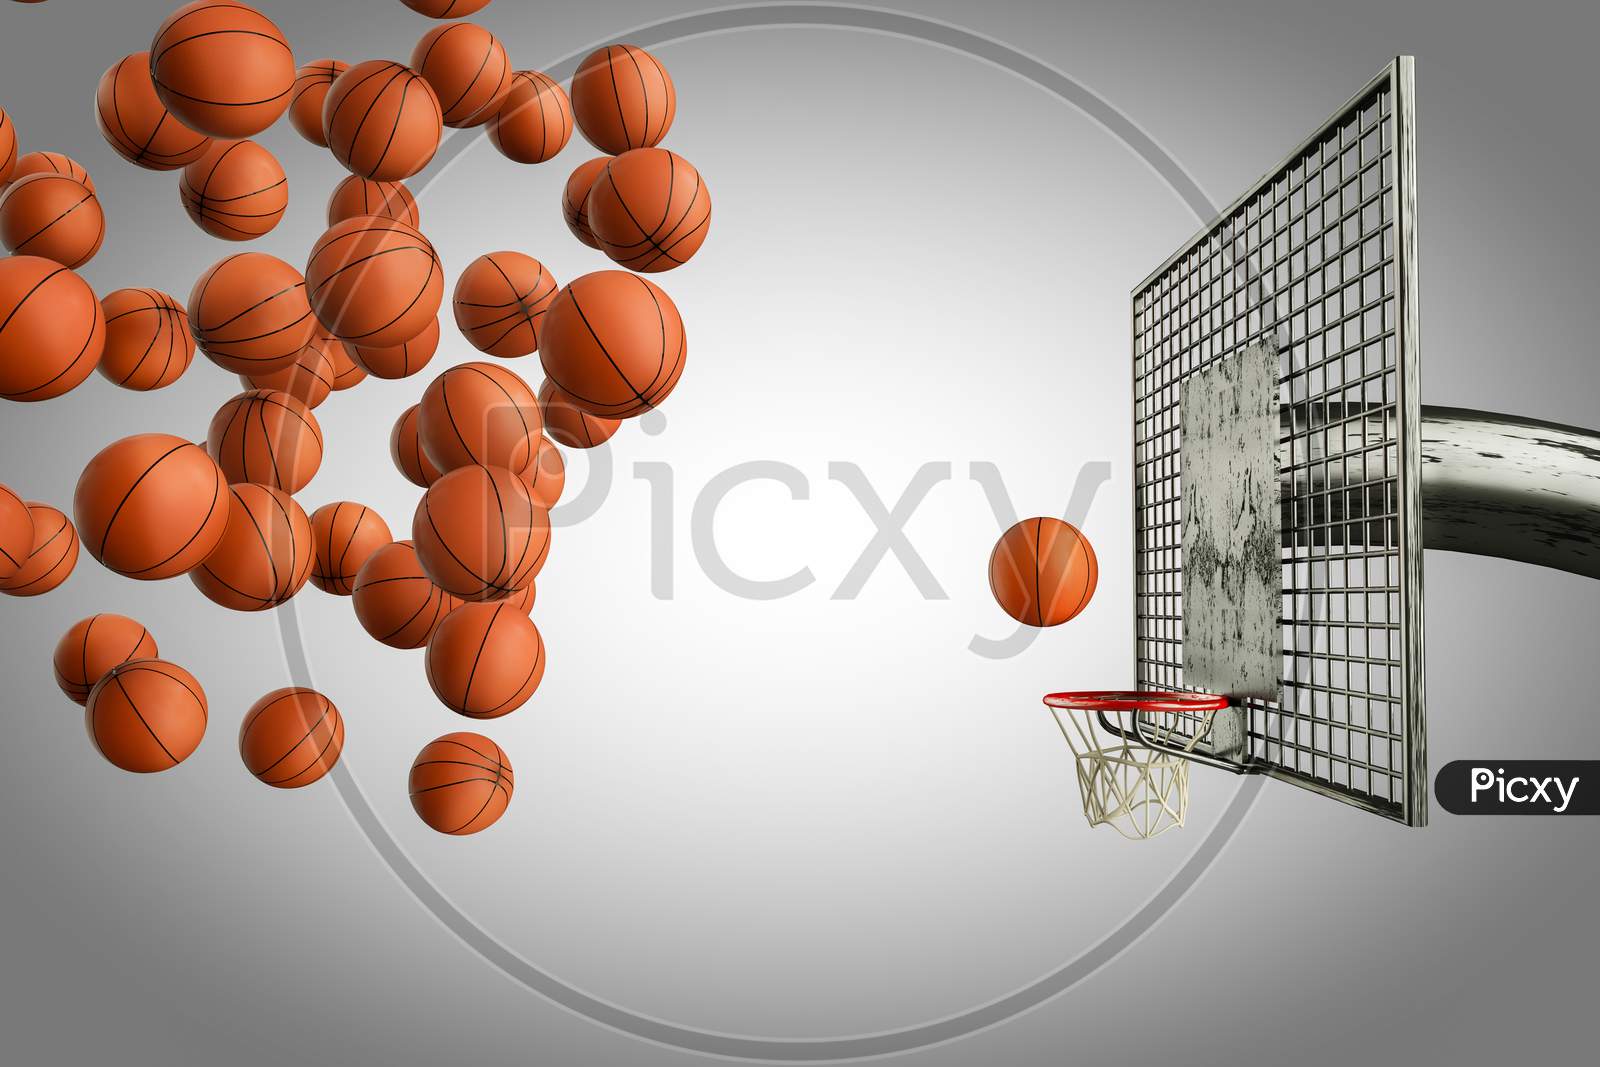 Many Basketballs Try To Get Into The Basketball Hoop With One Basketball To Succeed In Basketball Het. Business Or Leadership Or Creativity Idea Or Succession Planing Concept. 3D Illustration